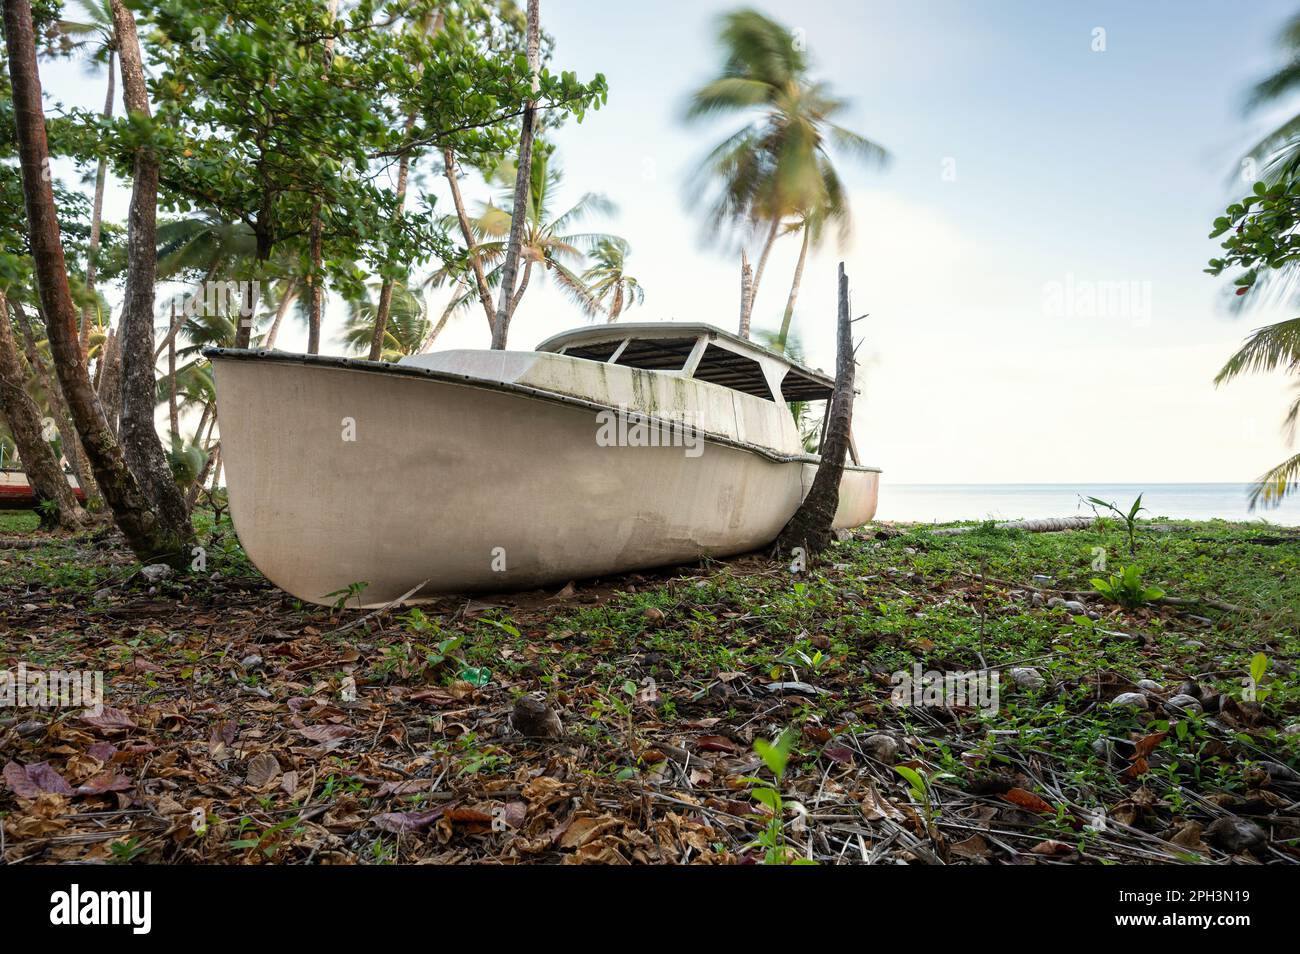 Abandoned boat on shore of caribbean island between palm trees Stock Photo